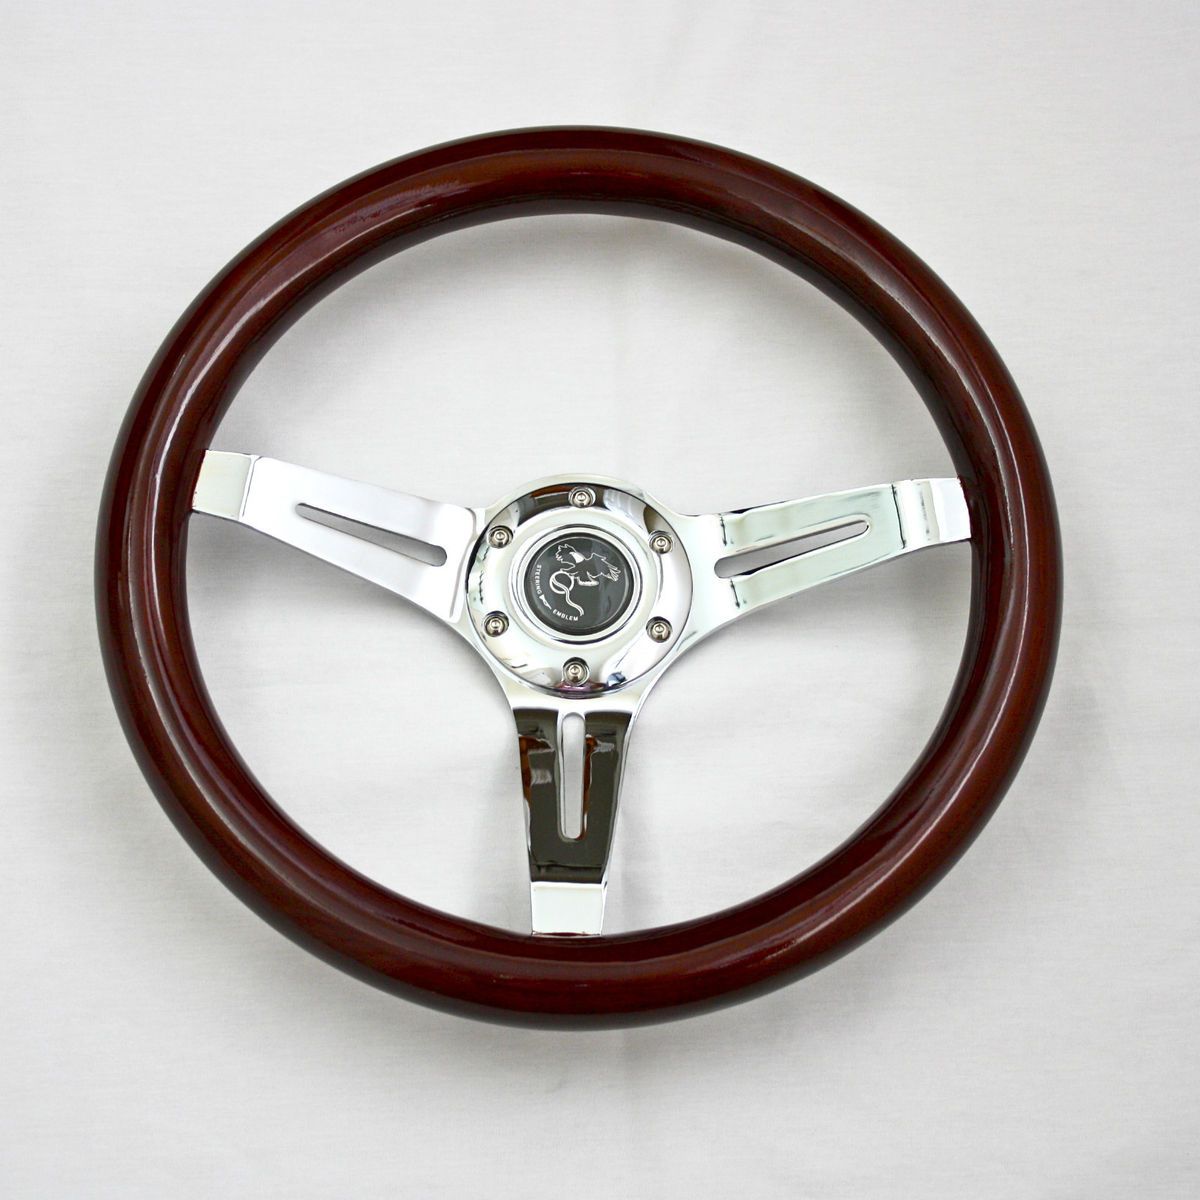 14 Universal Classic Wood Steering Rim for Hot Rods and Replica Cars 6